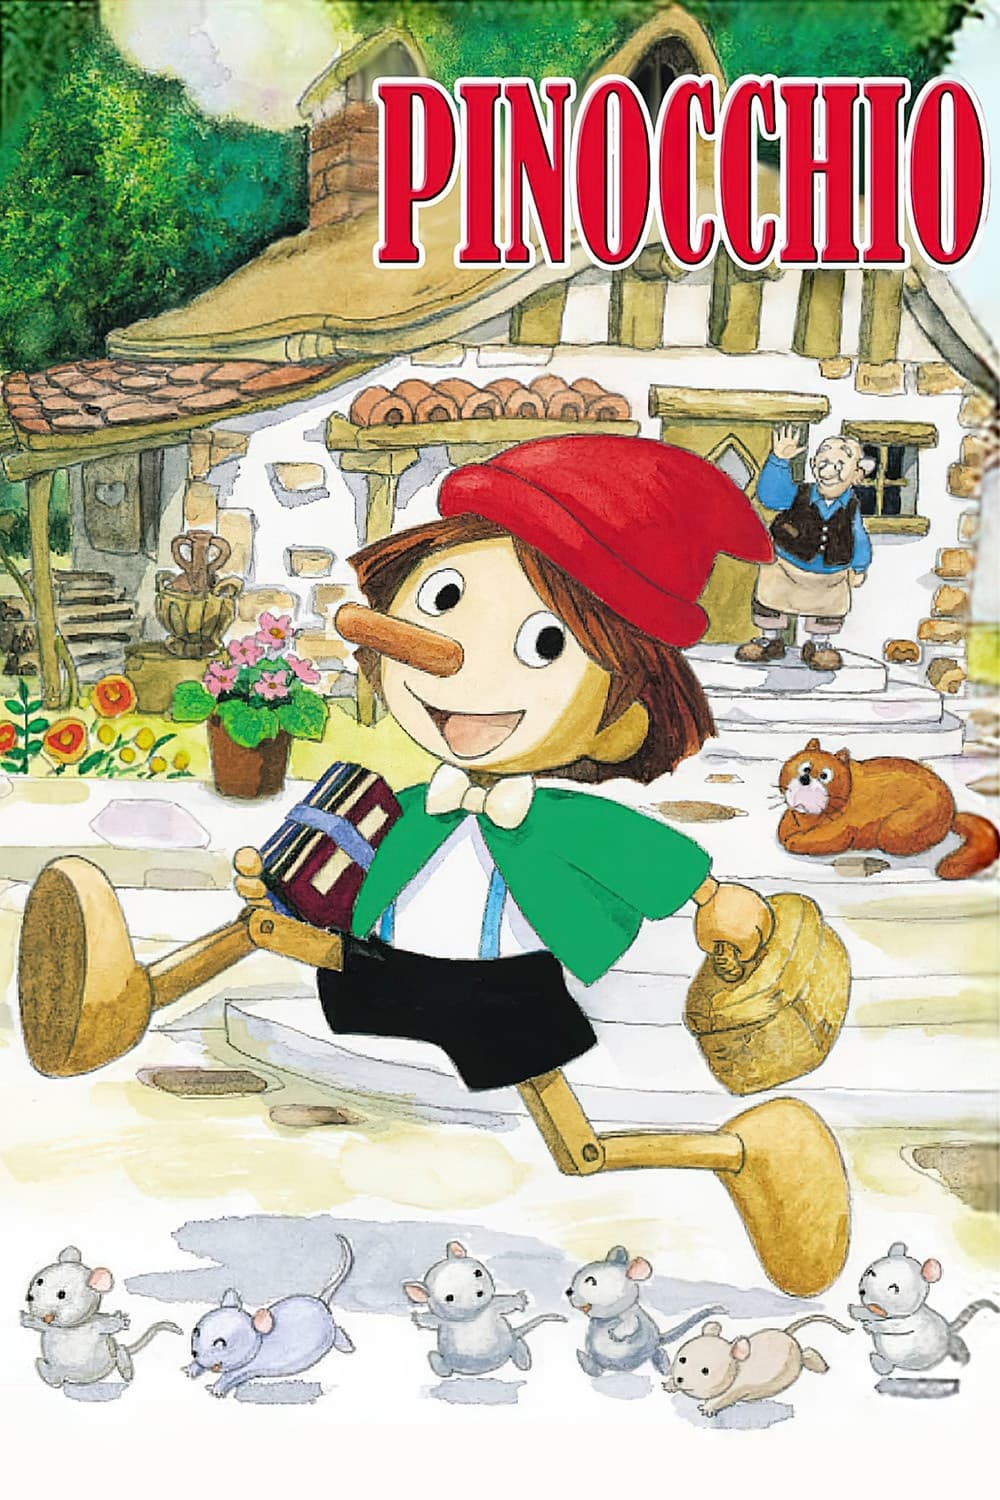 whats the name of the cat in pinocchio story